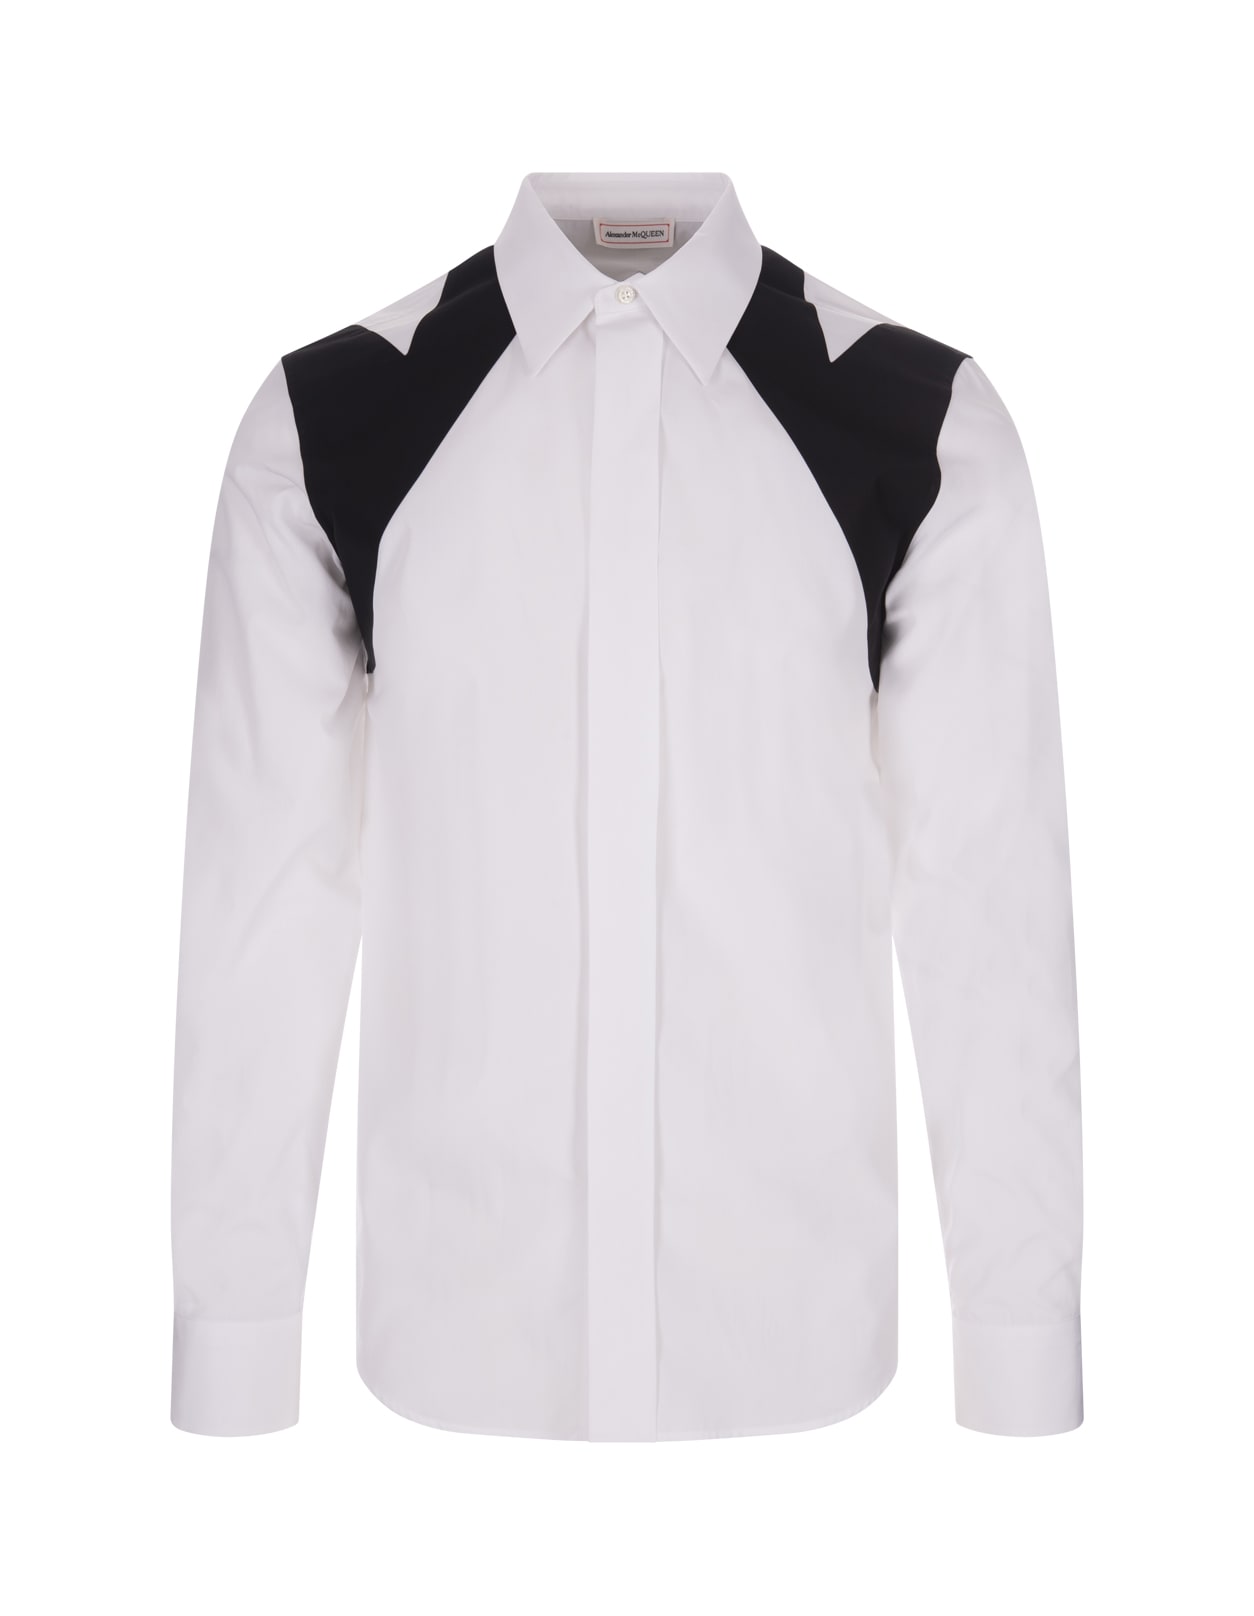 ALEXANDER MCQUEEN CUT-OUT HARNESS SHIRT IN WHITE